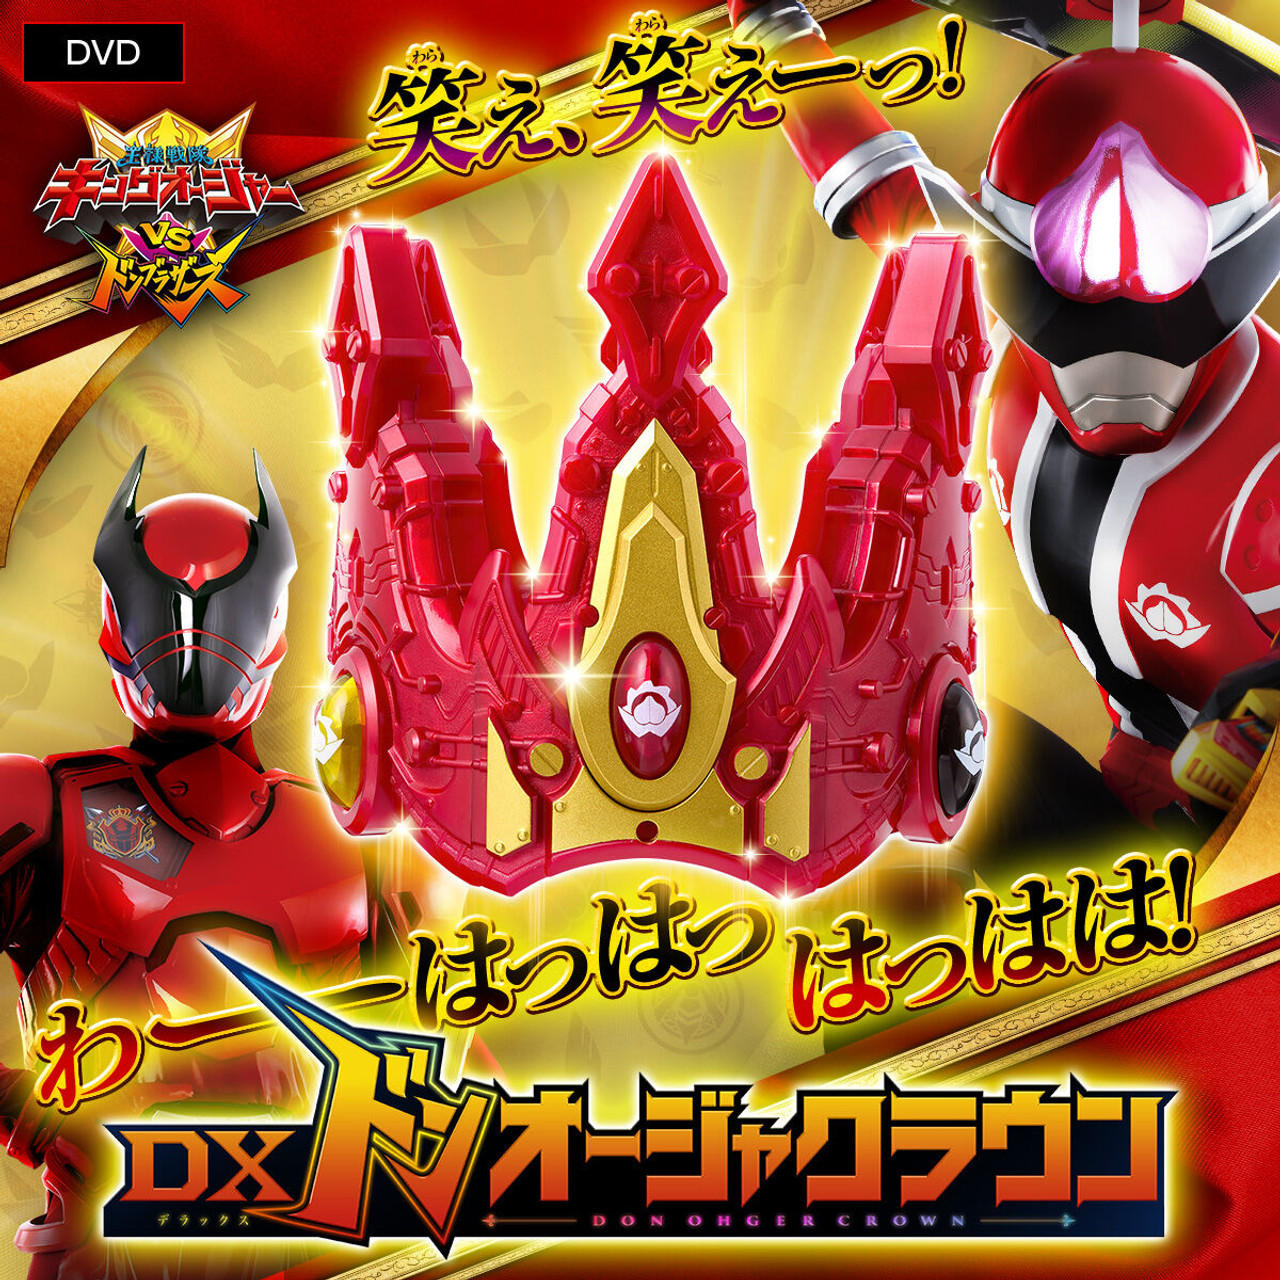 [DVD] King VS Donbrothers / King VS Kyoryu Special Edition Donbrothers Ver.  DX Don Ohger Crown